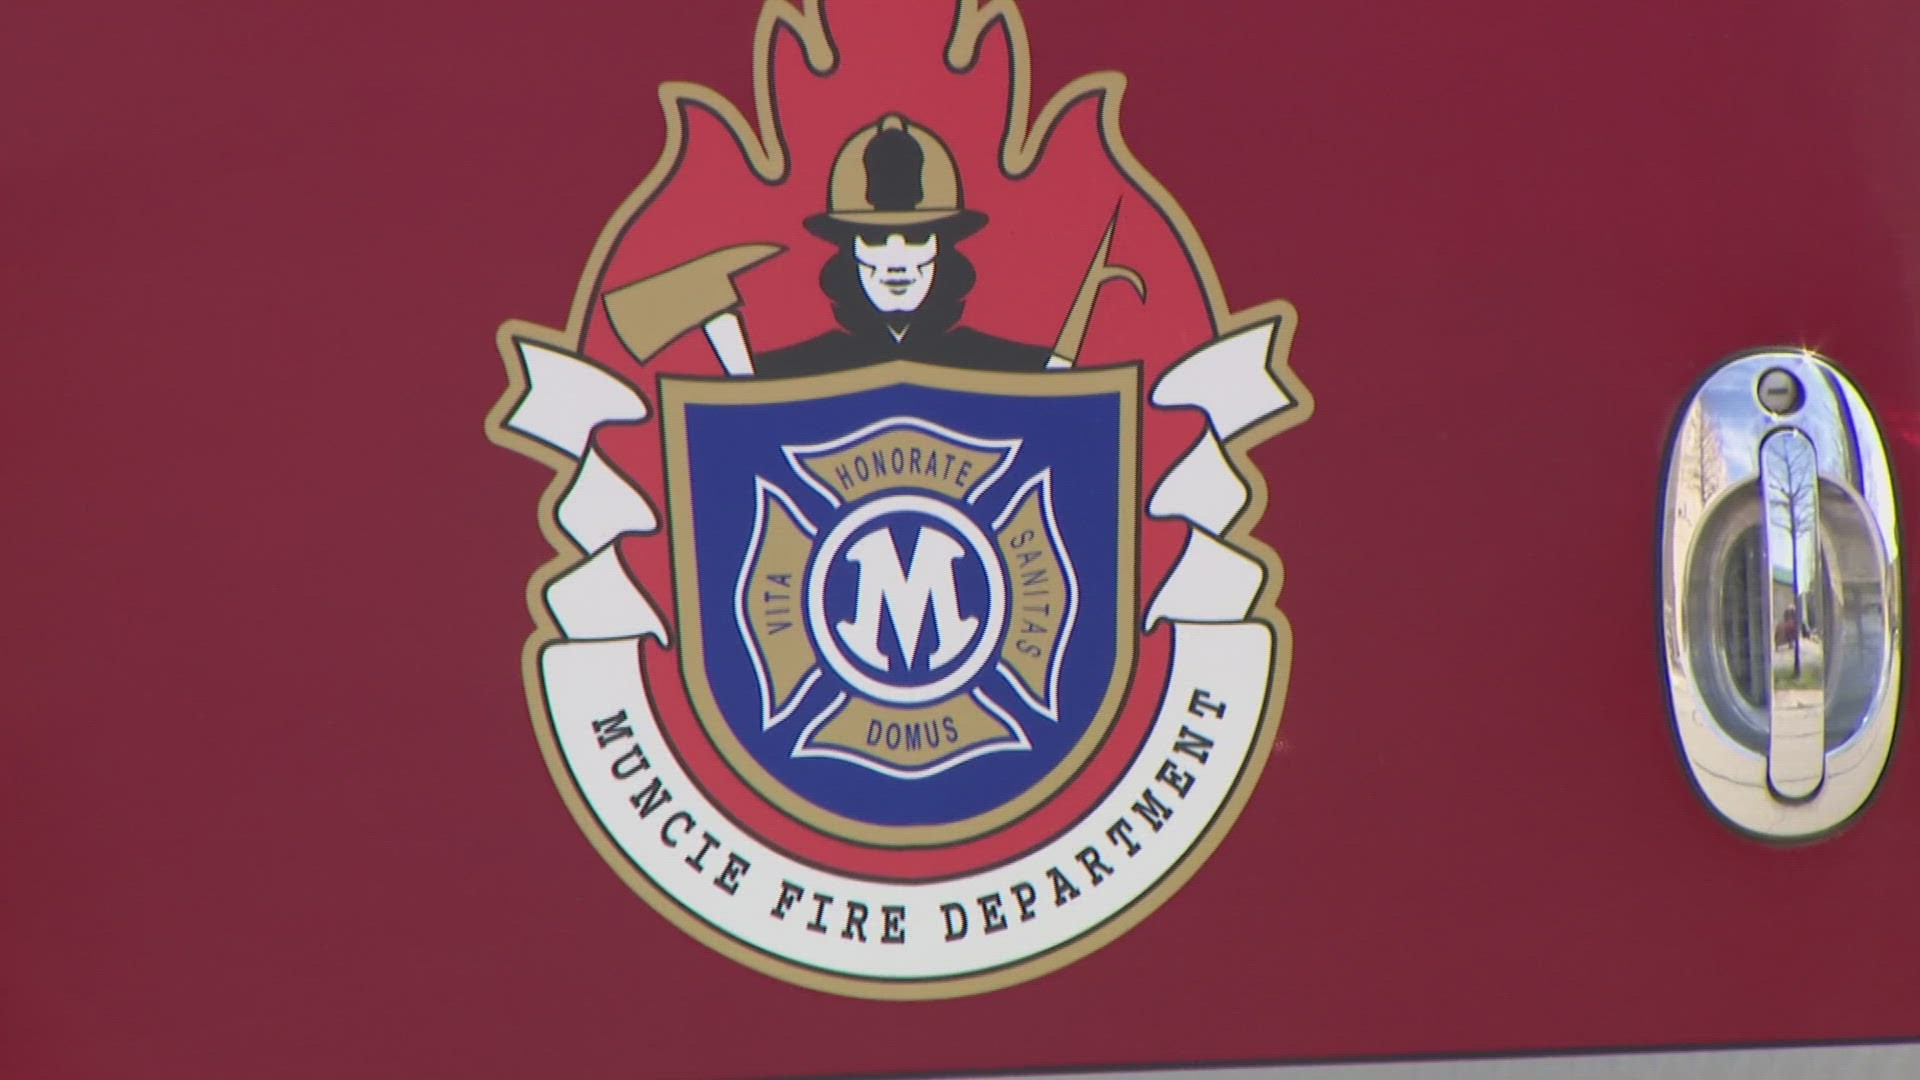 The cheating scheme involved firefighter and EMT certification exams and resulted in disciplinary action against nine members of the Muncie Fire Department.